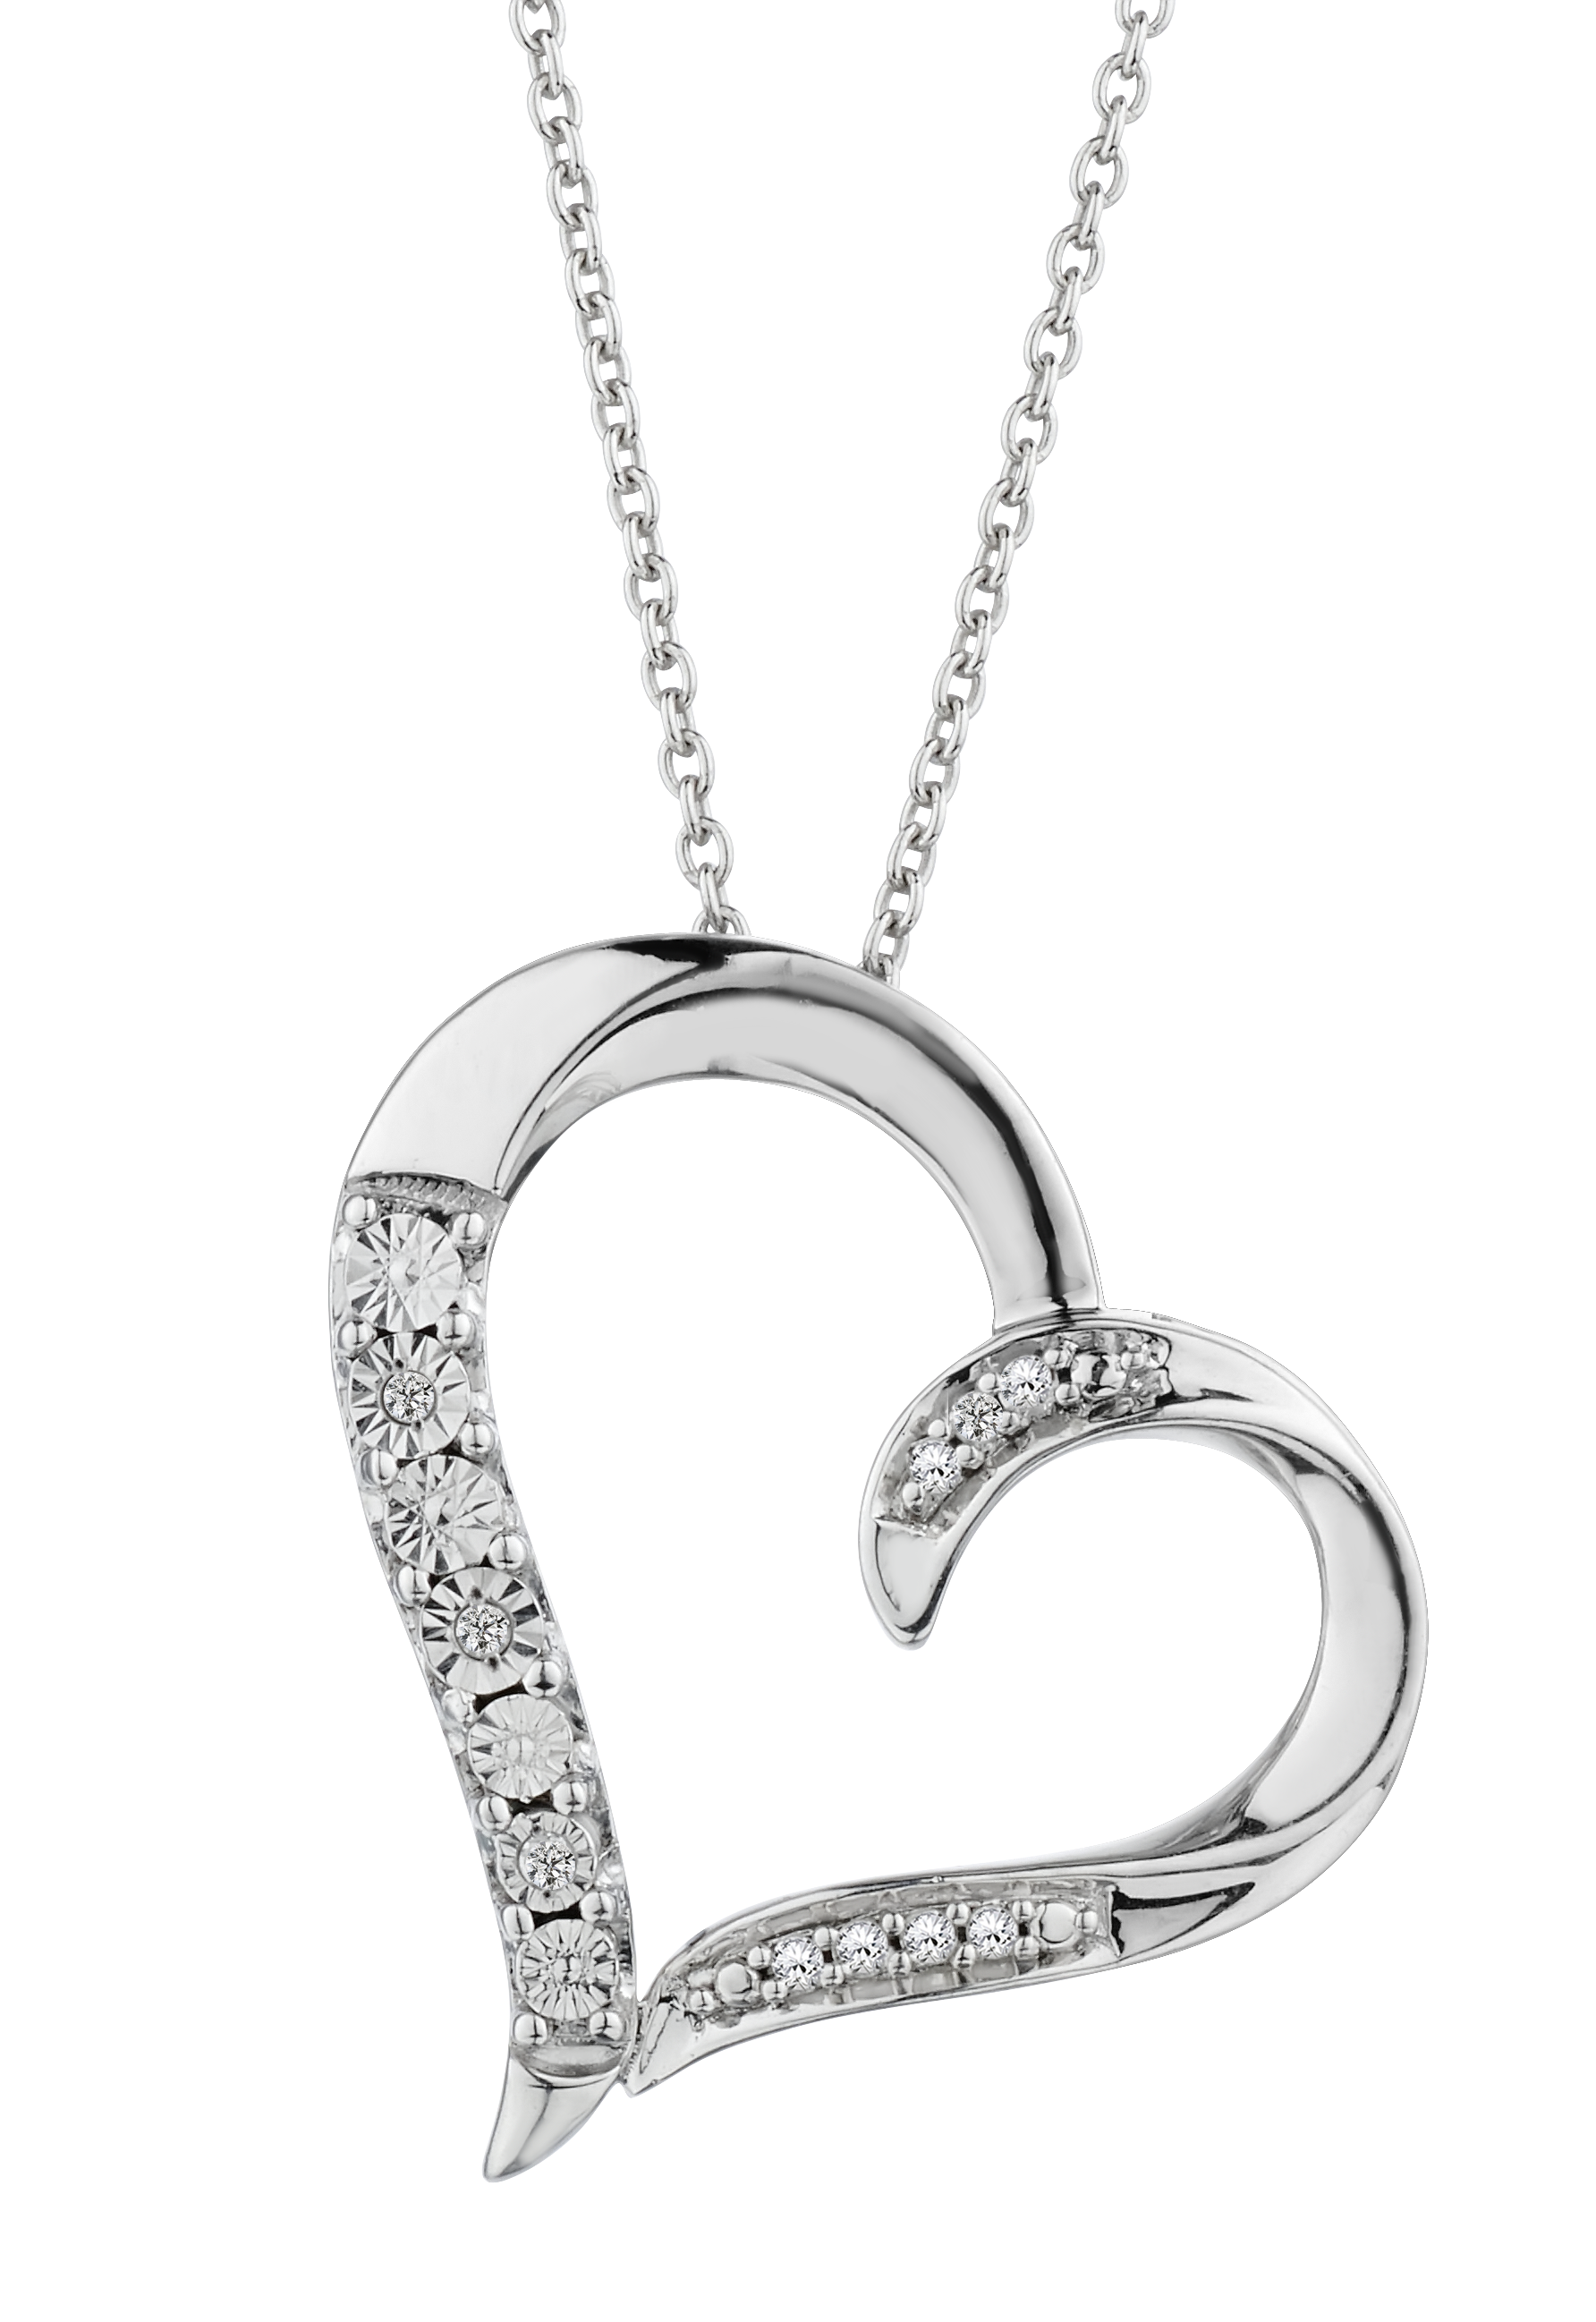 .05 Carat of Diamonds Miracle Heart Pendant, Sterling Silver.....................NOW